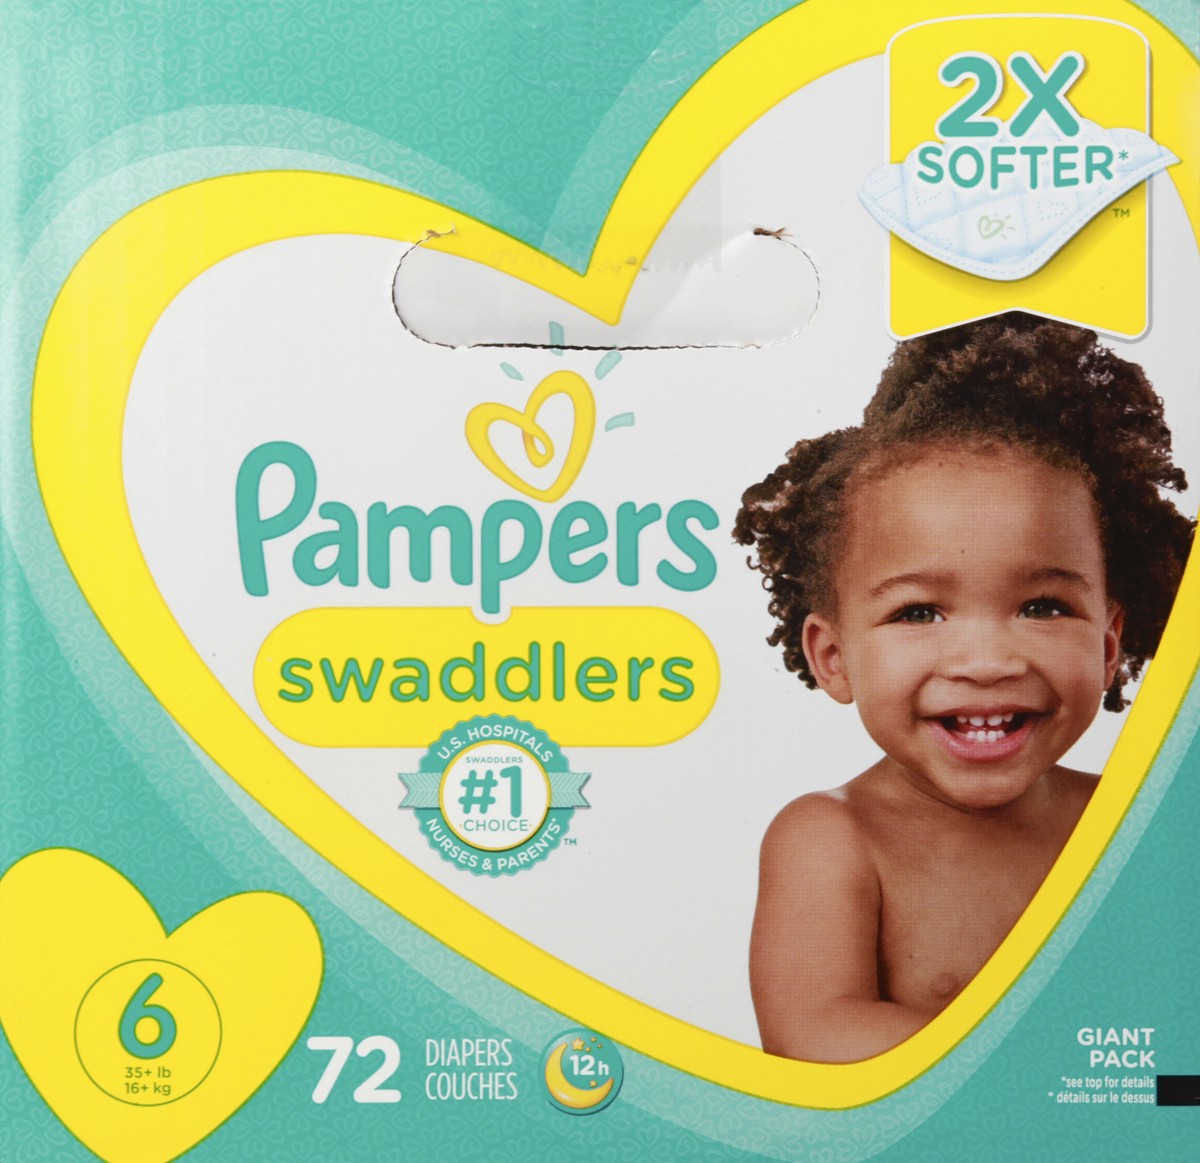 slide 10 of 11, Pampers Swaddlers Diapers Size, 6 72 ct